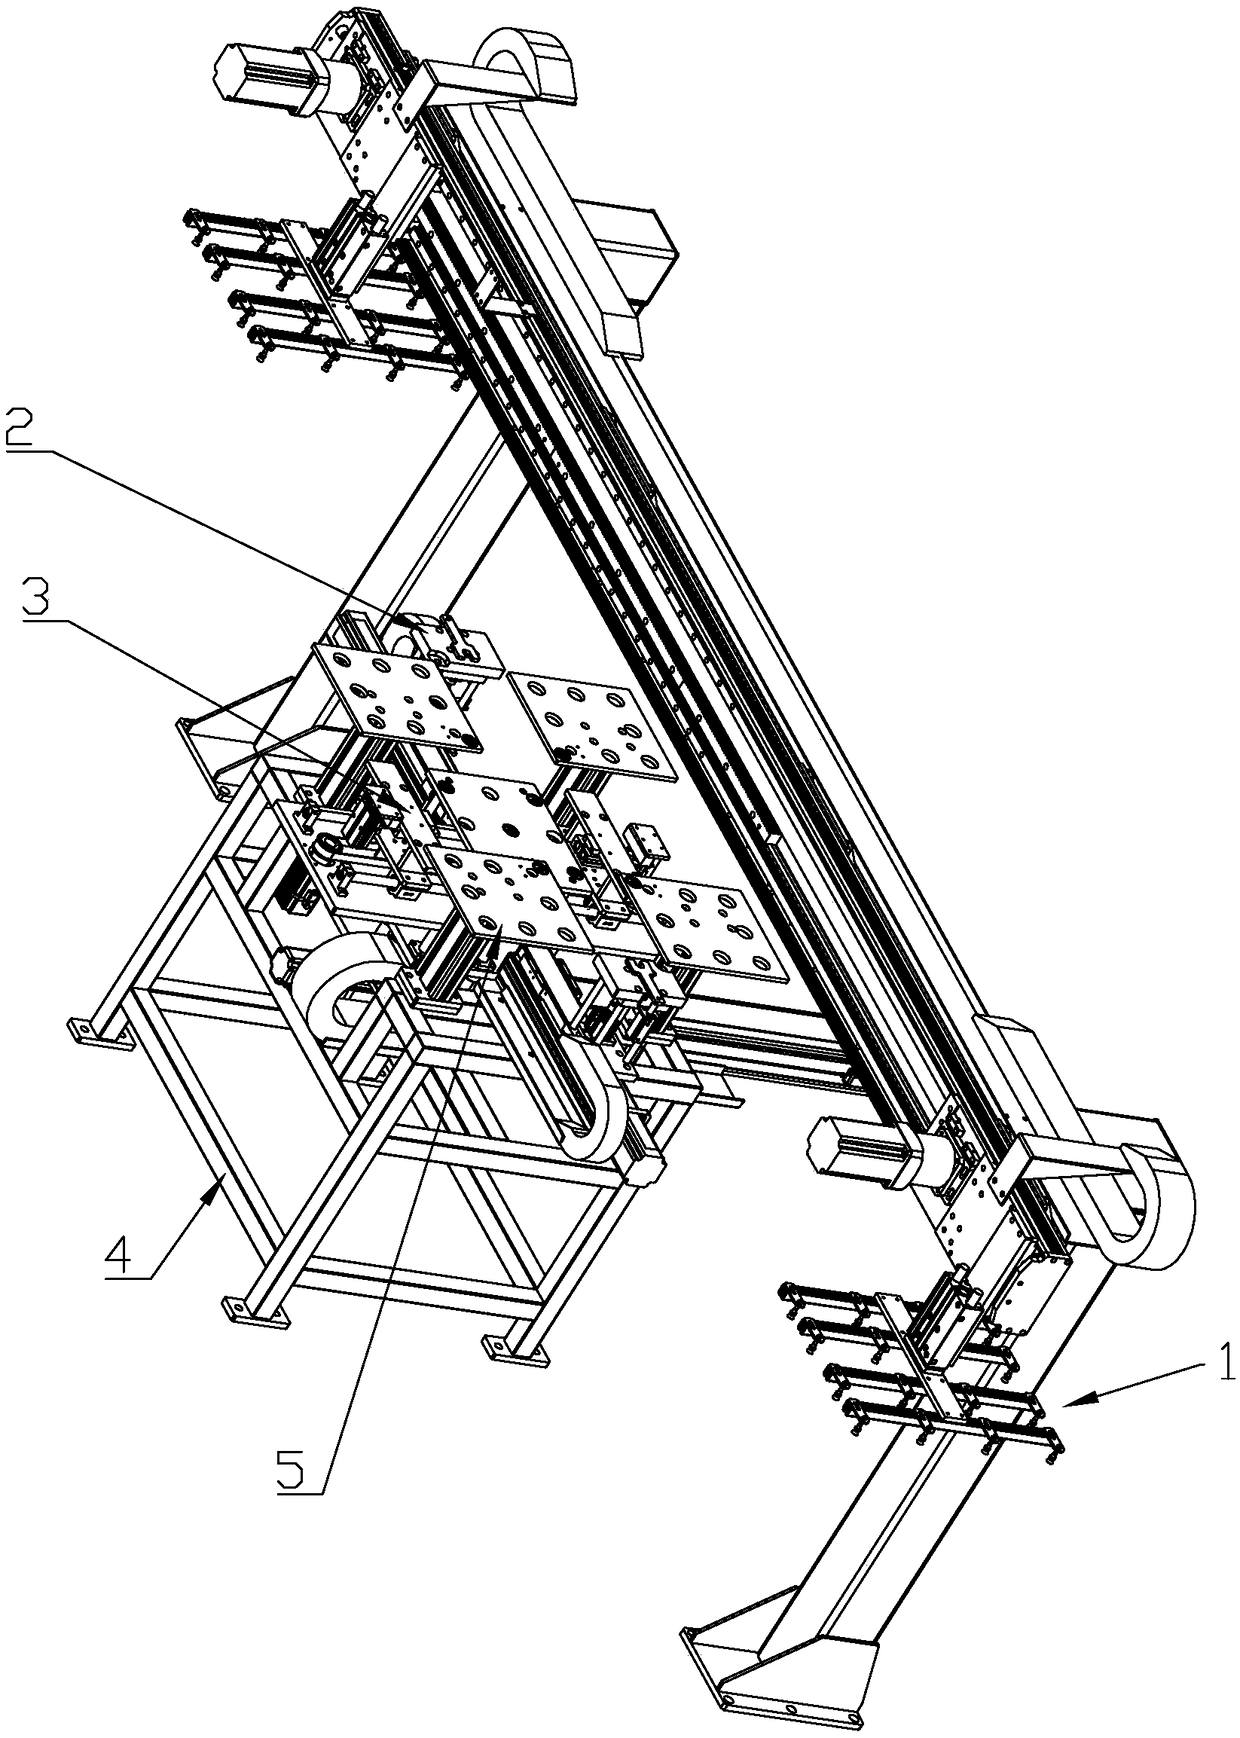 Copper plate assembling device